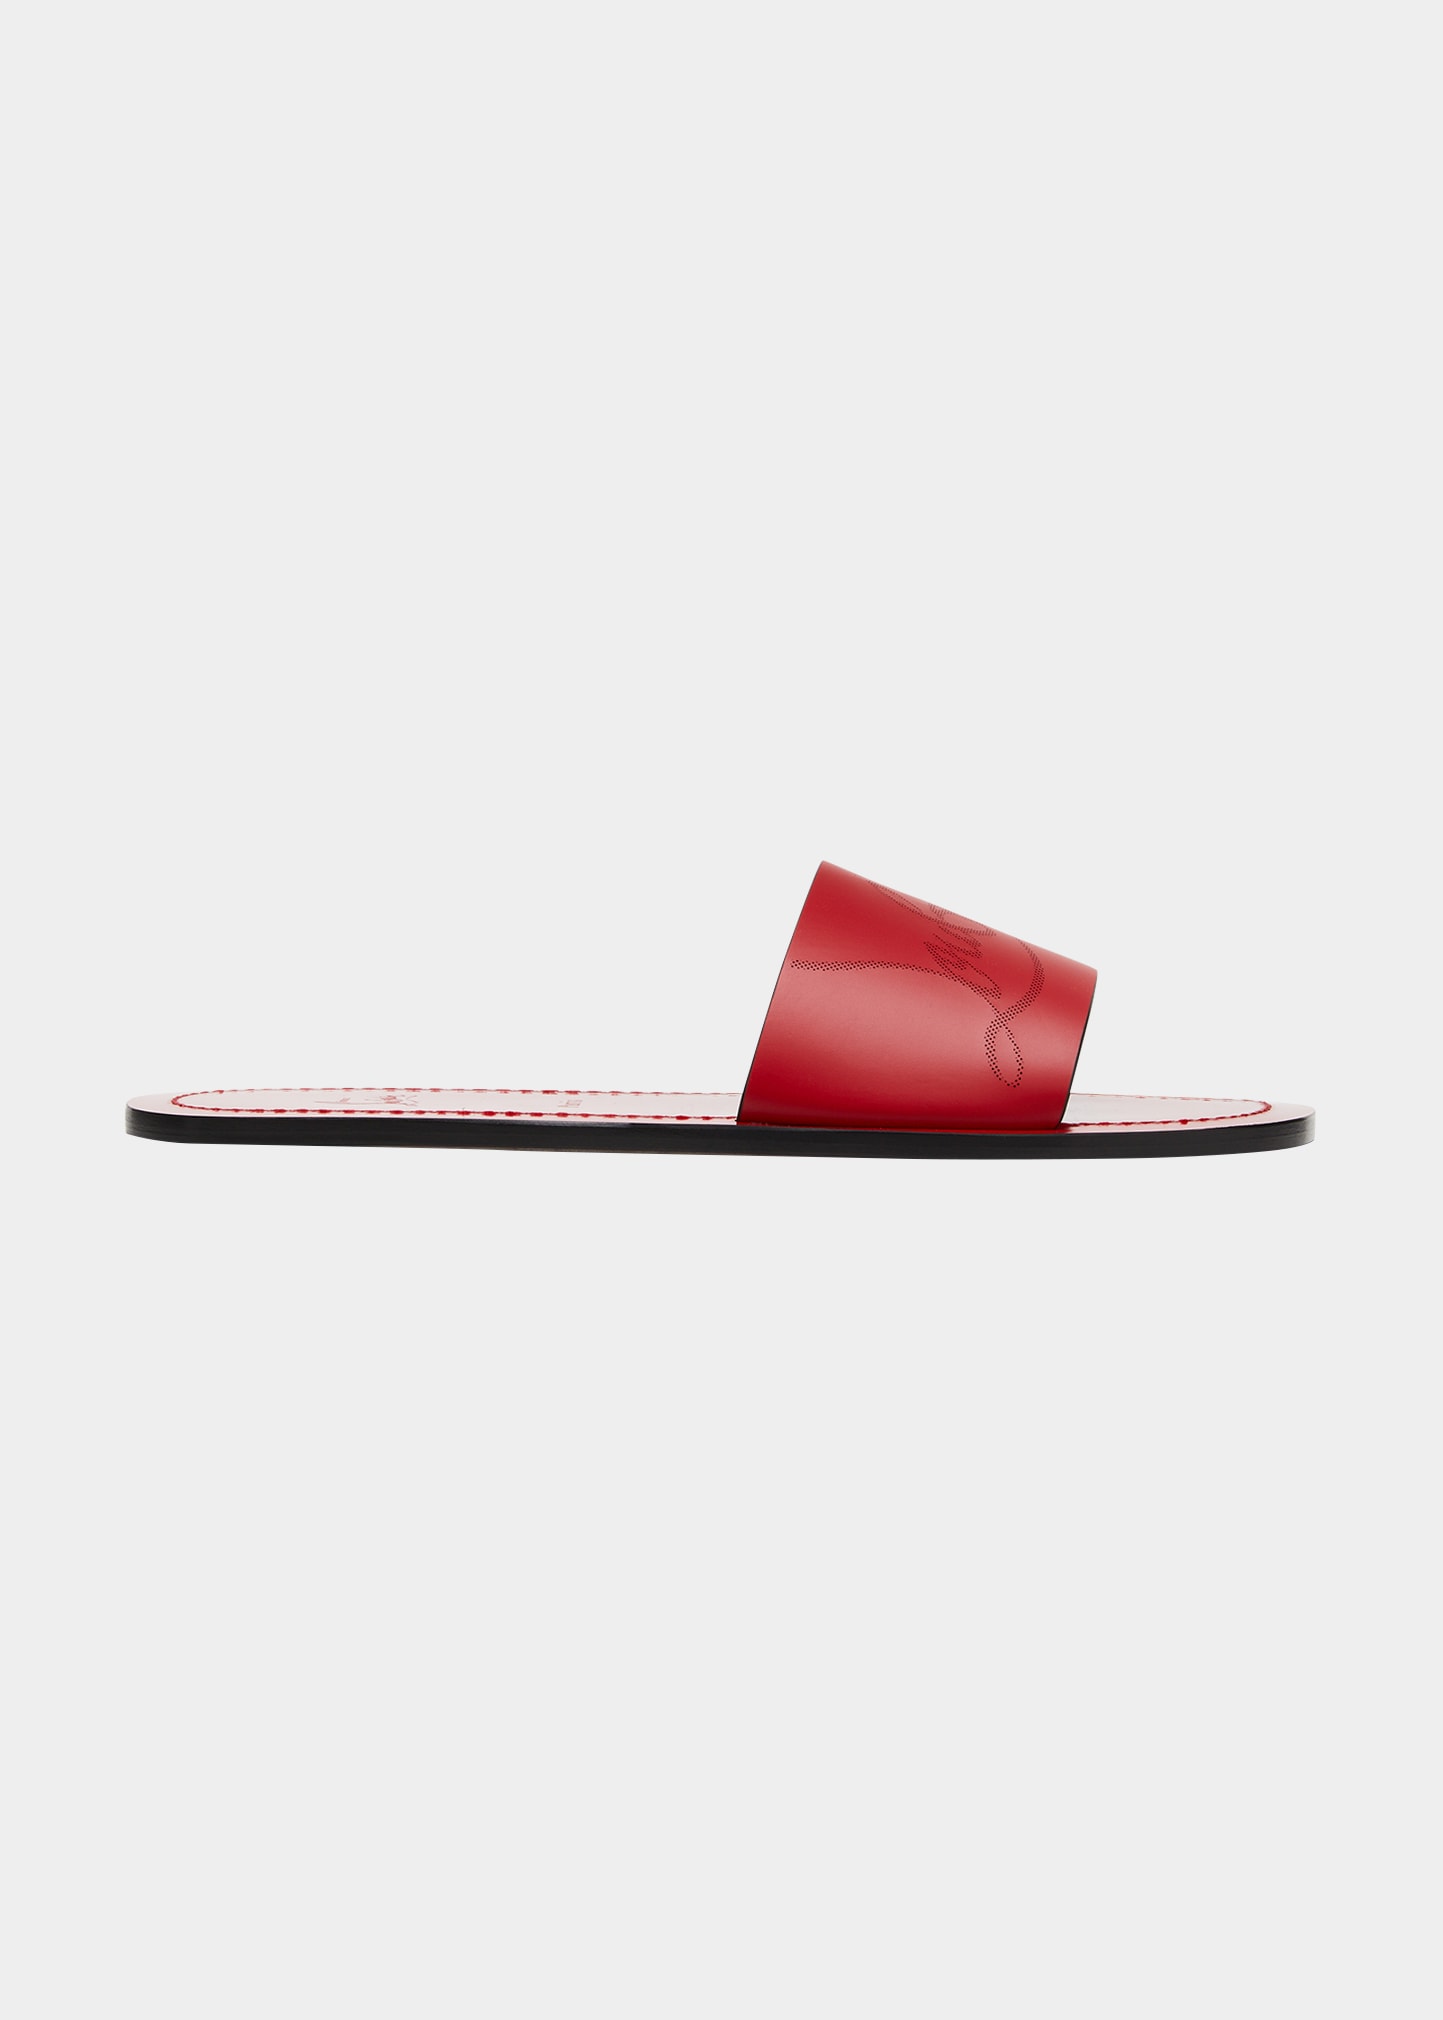 Christian Louboutin Men's Coolraoul Leather Slide Sandals